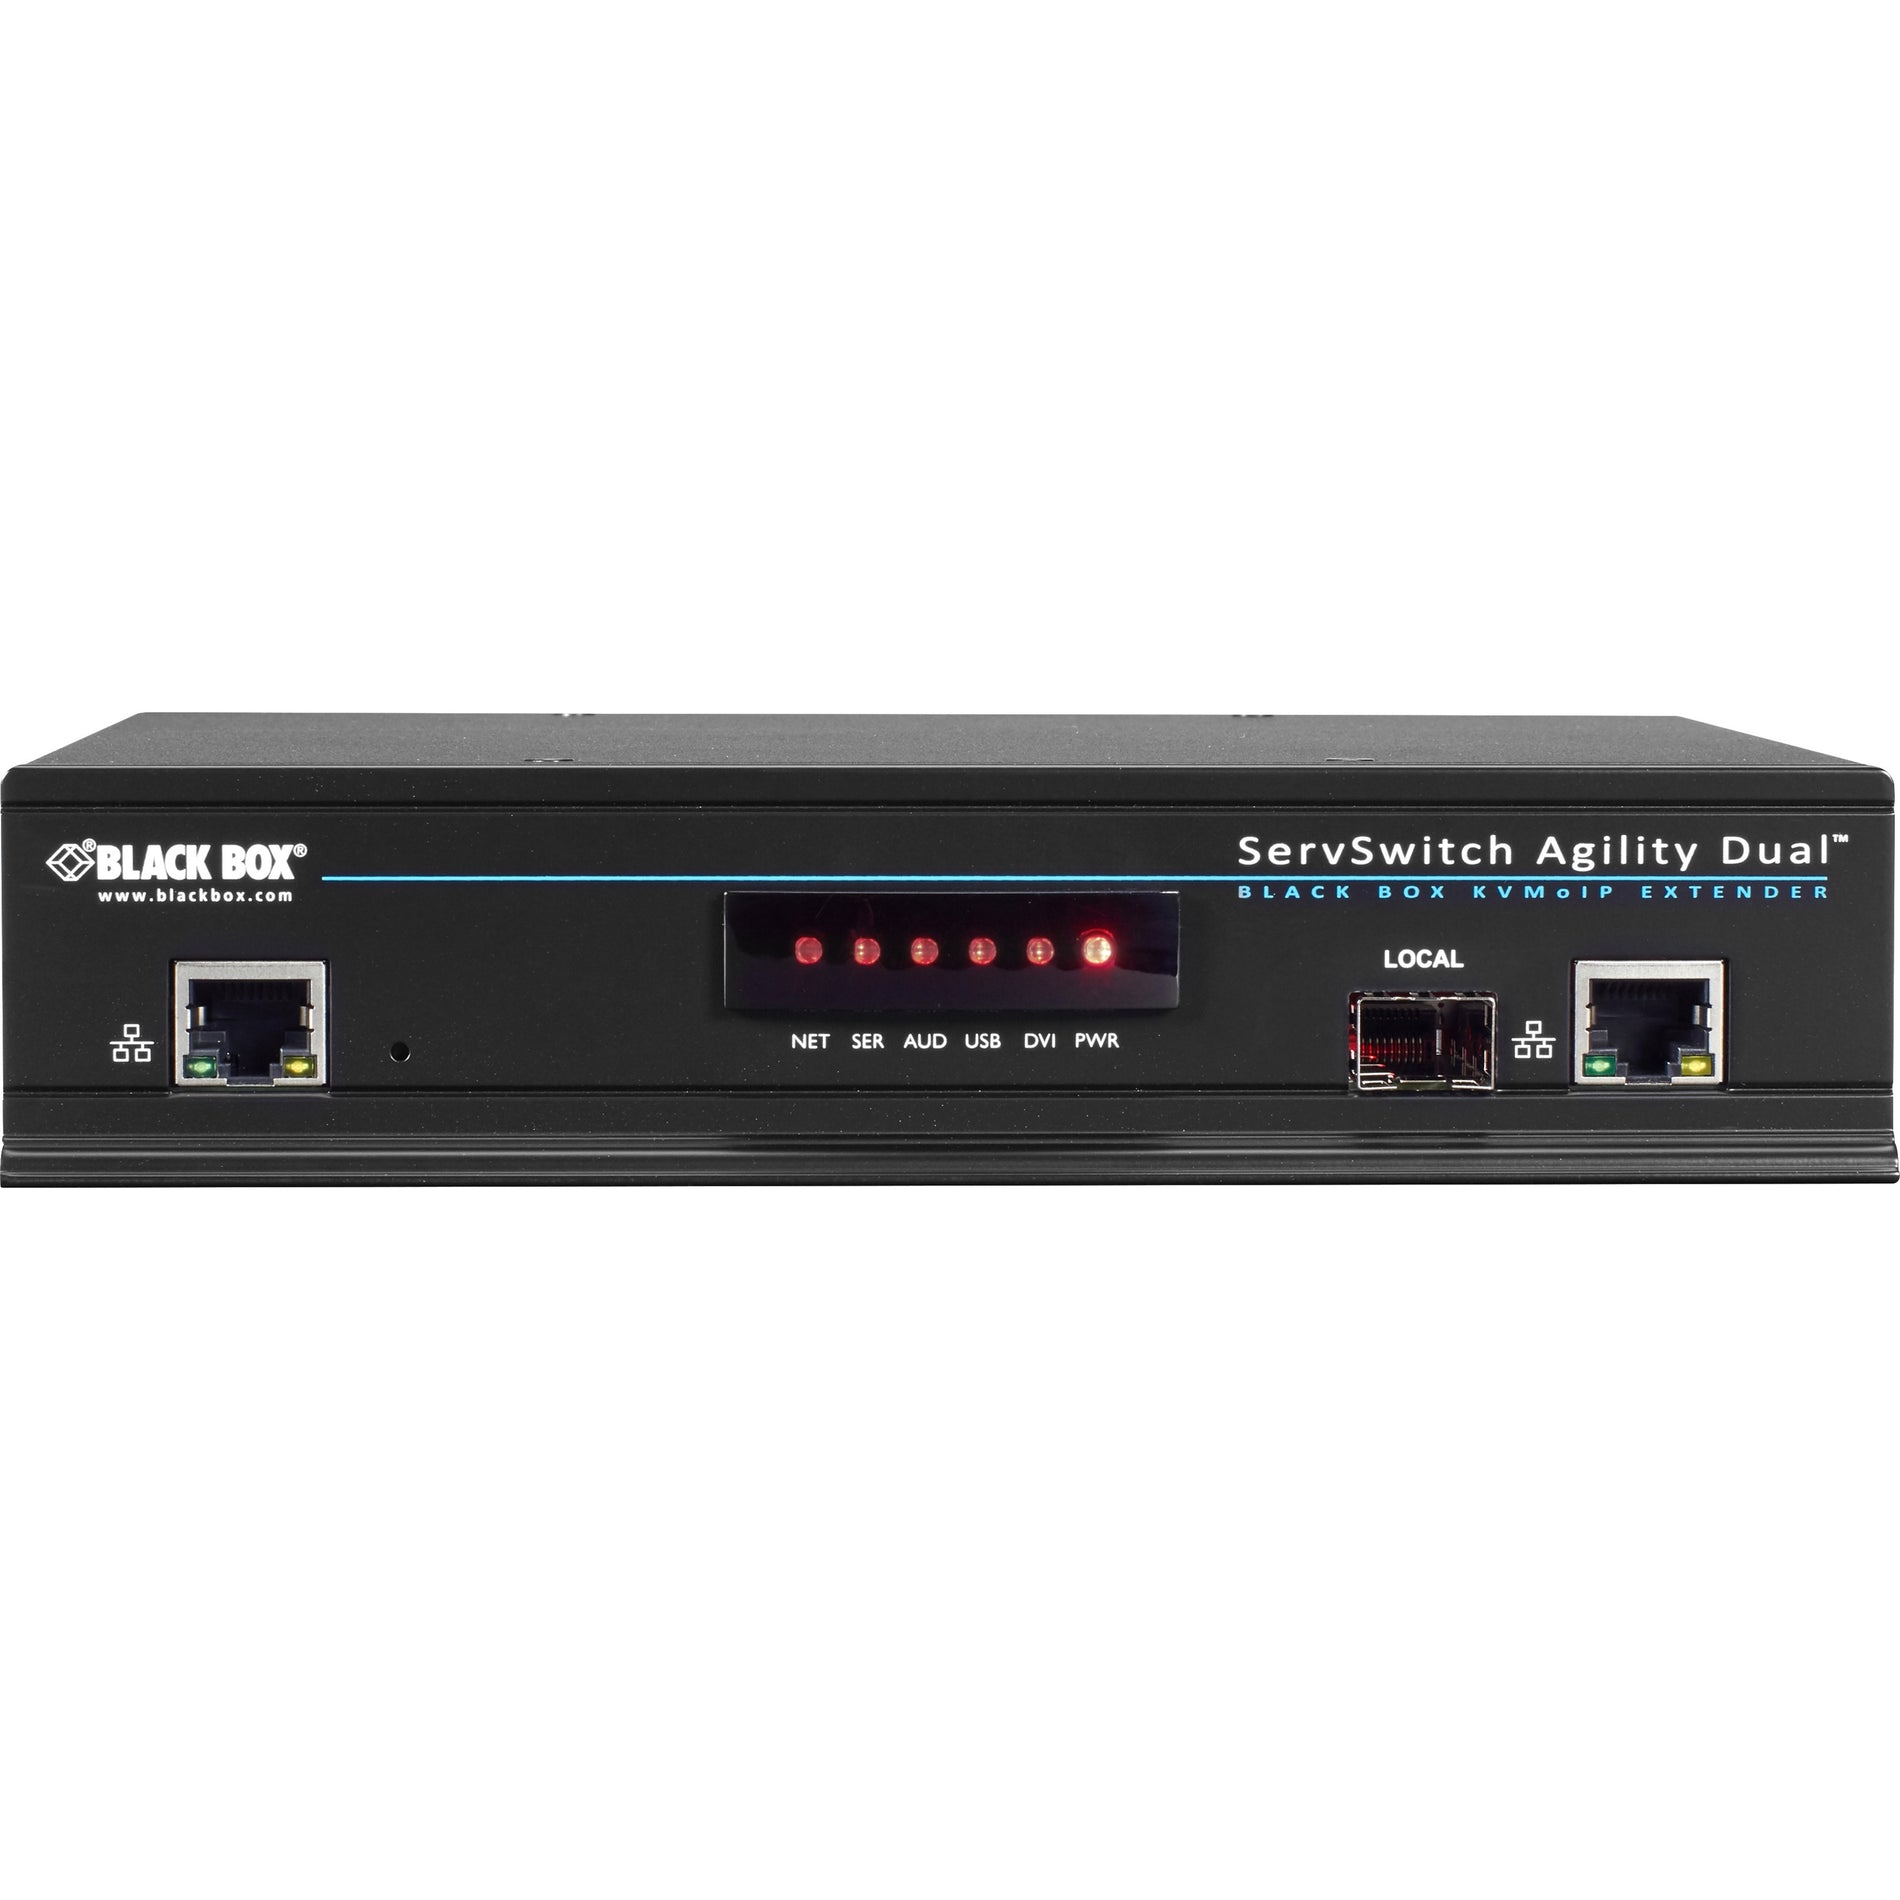 Black Box ACR1002A-T ServSwitch Agility Dual-Head or Dual-Link Transmitter, KVM Extender Transmitter, WQUXGA, 2560 x 1600, 2 Year Warranty